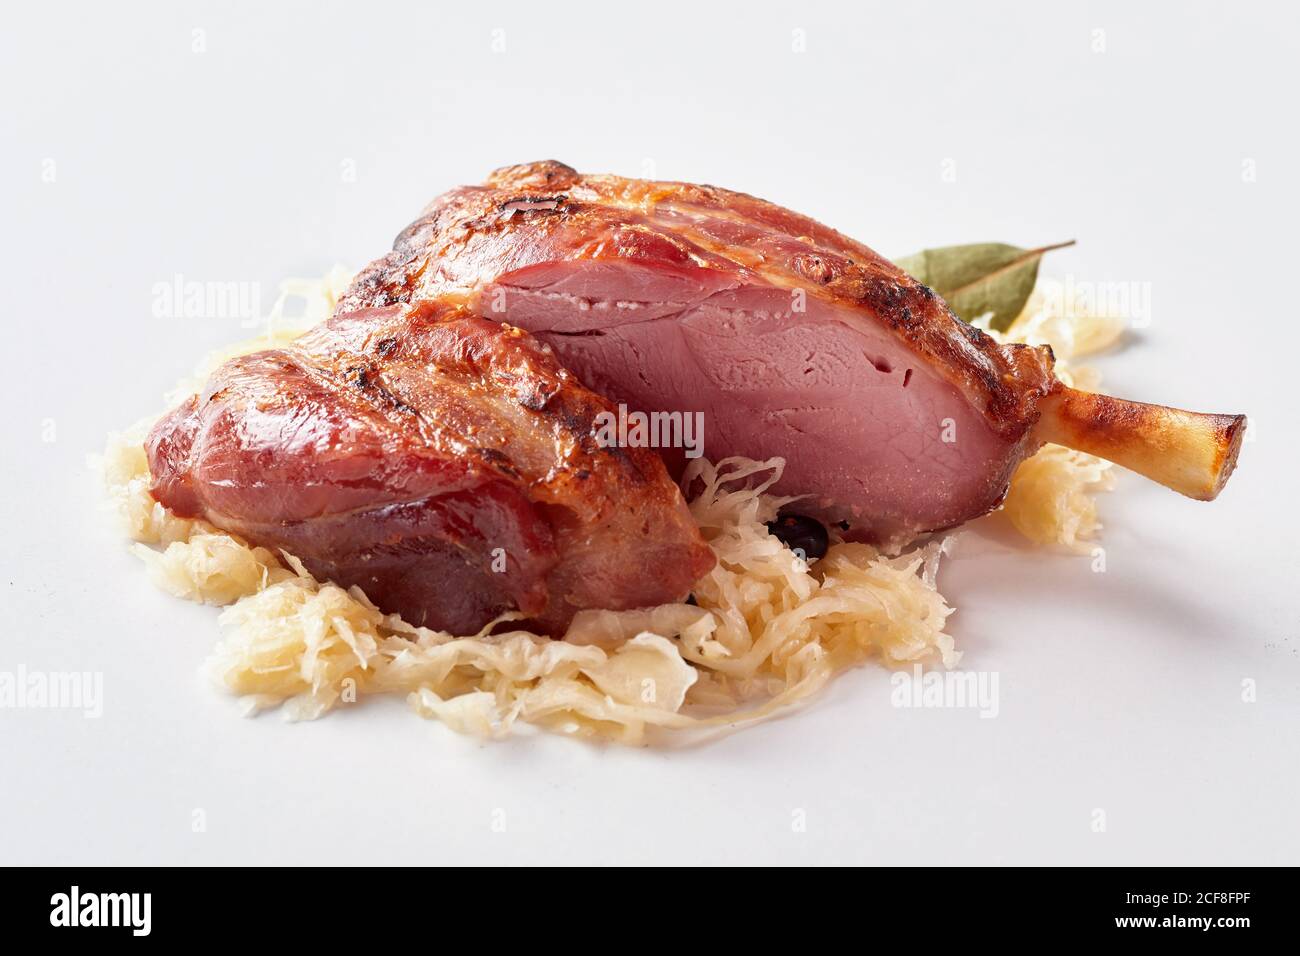 Sliced ham or pork hock on a bed of sauerkraut for traditional German cuisine over a white background Stock Photo